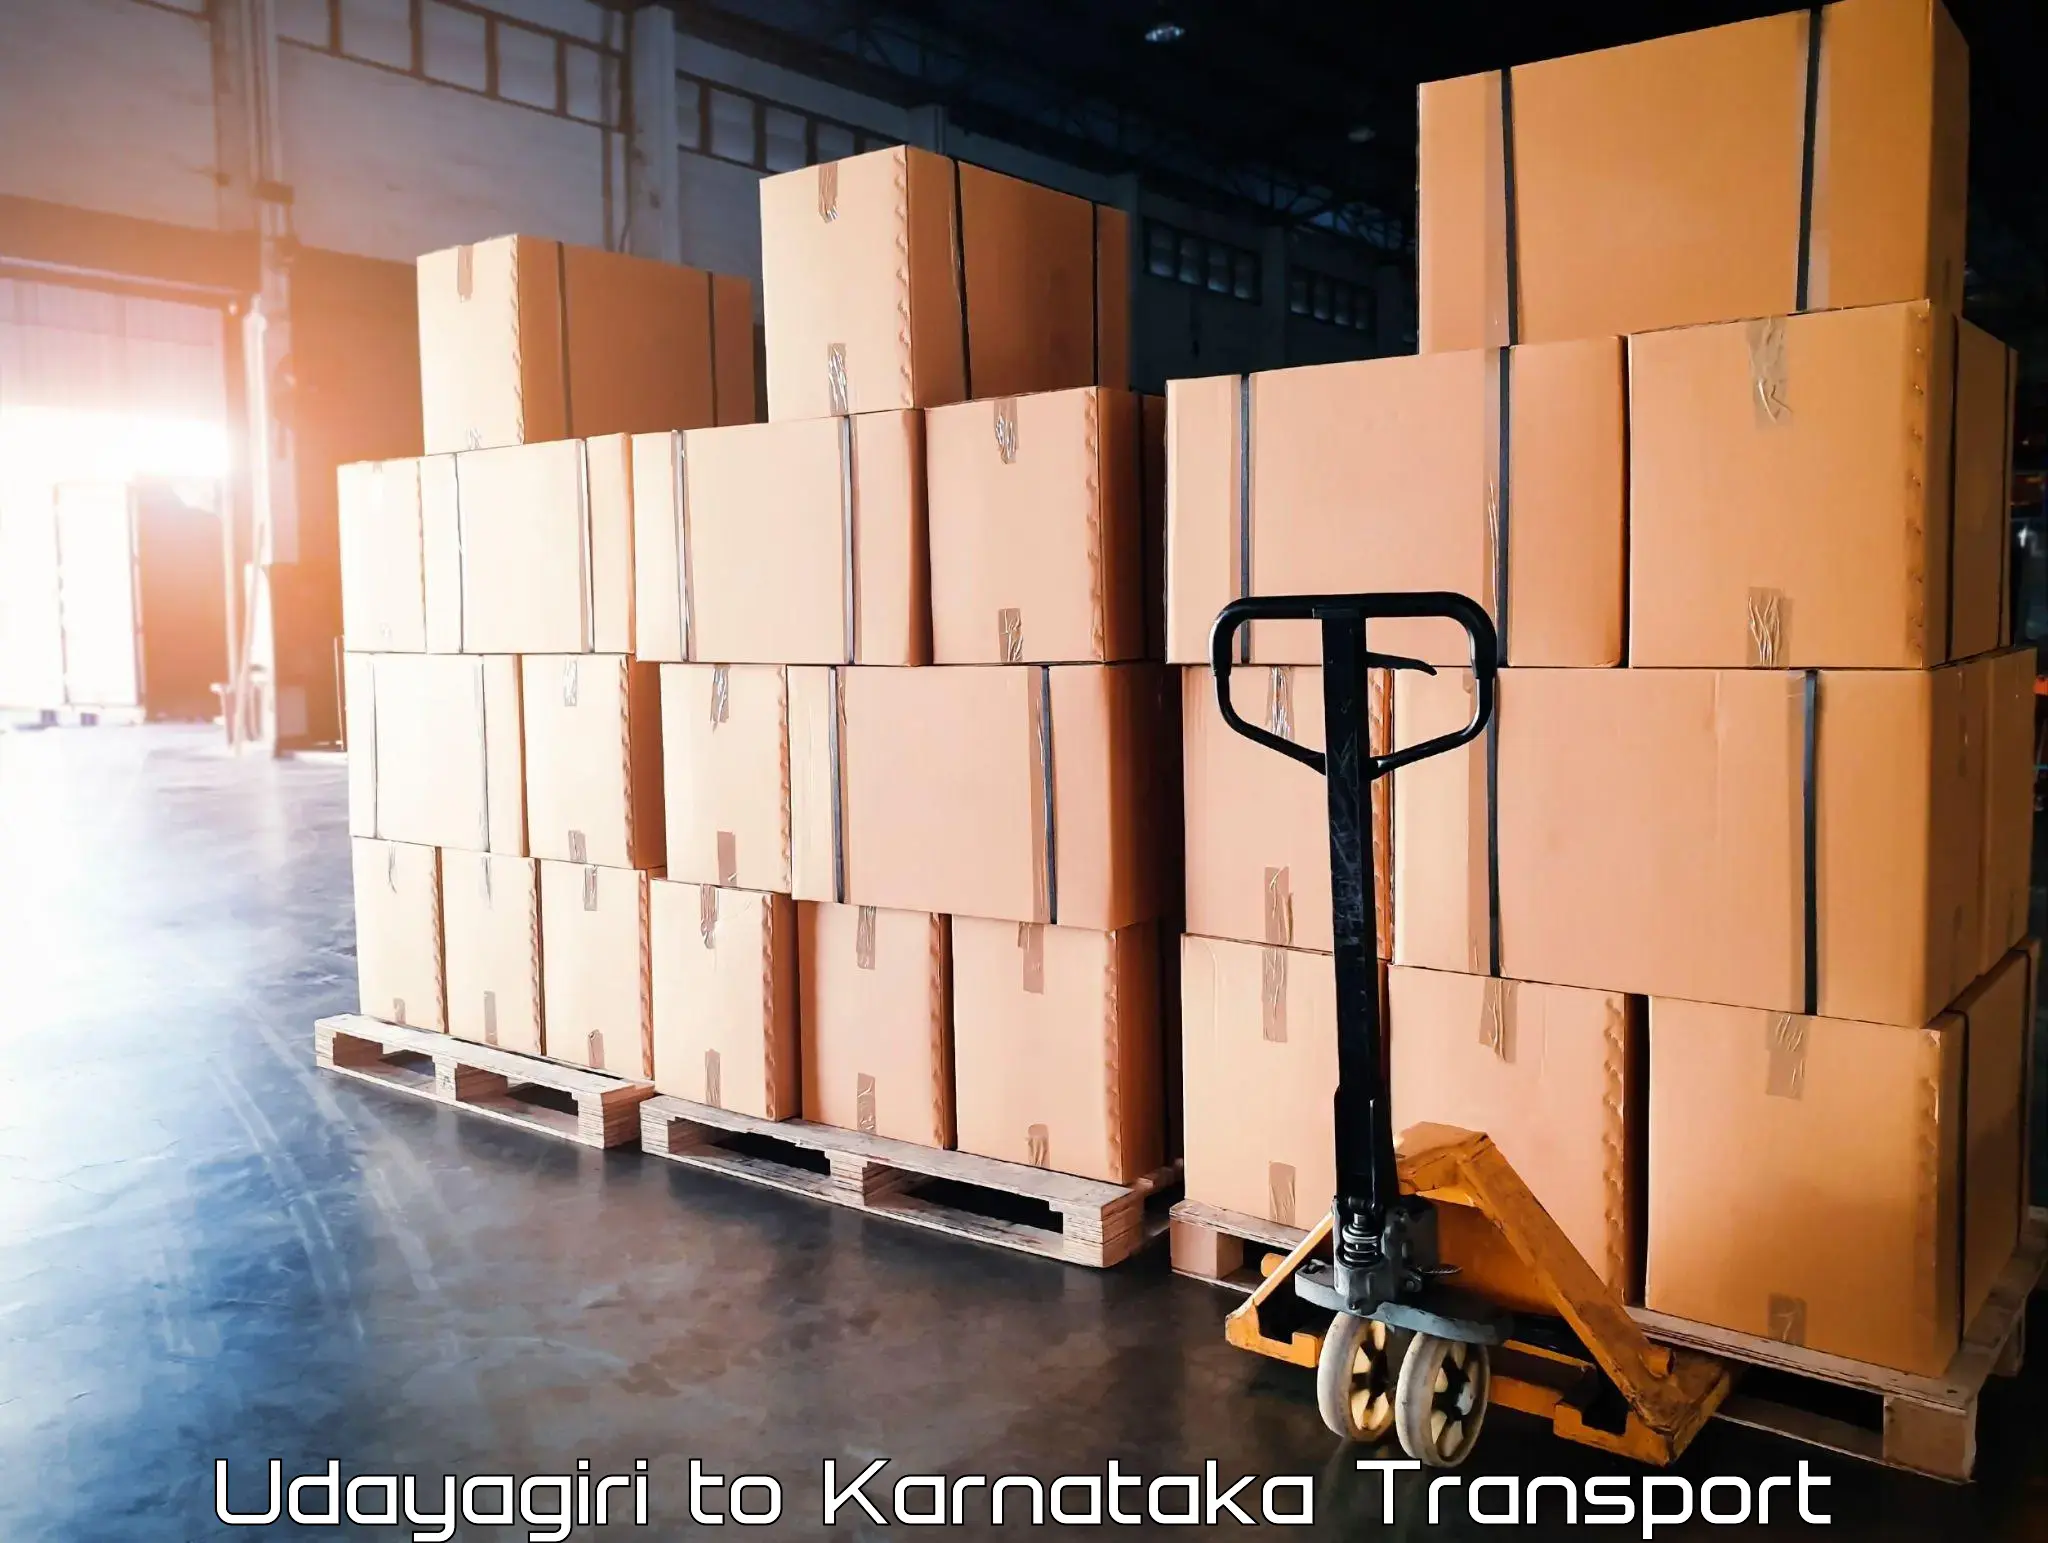 Transport in sharing Udayagiri to Manipal Academy of Higher Education